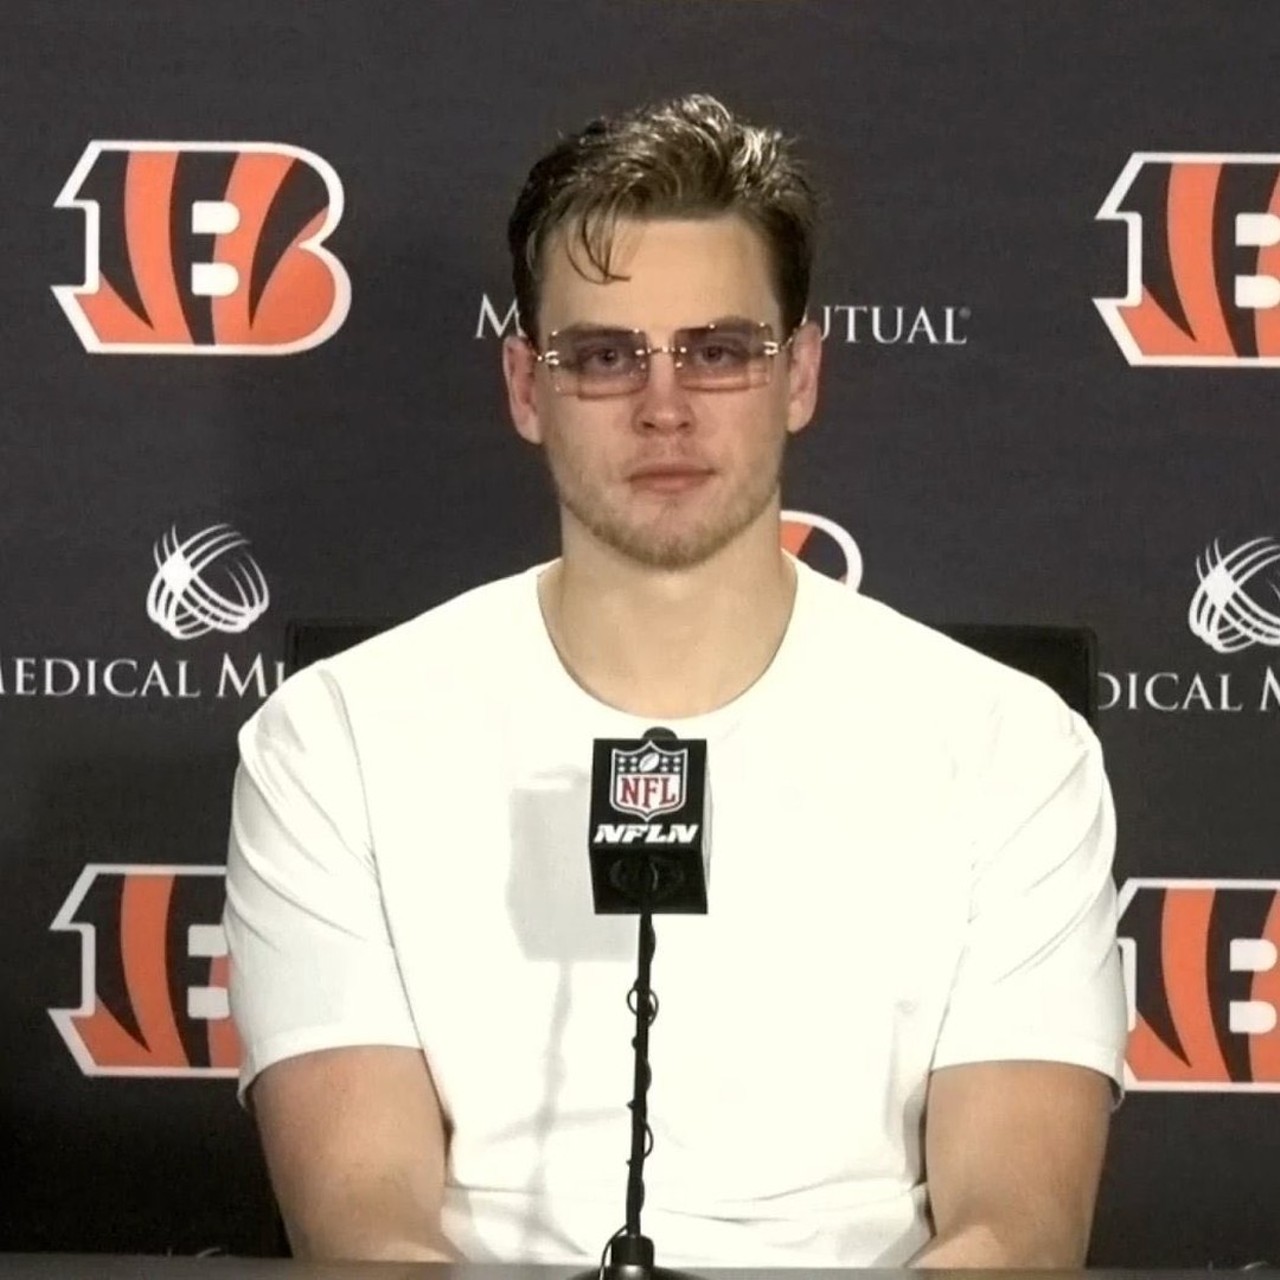 Fashion Icon Joe Burrow
Okay, sure, he's the Cincinnati Bengals' quarterback, but Burrow has become almost as well known for his style. Toss on some rose sunglasses and a SpongeBob suit and tell everyone you're on your way to the game.